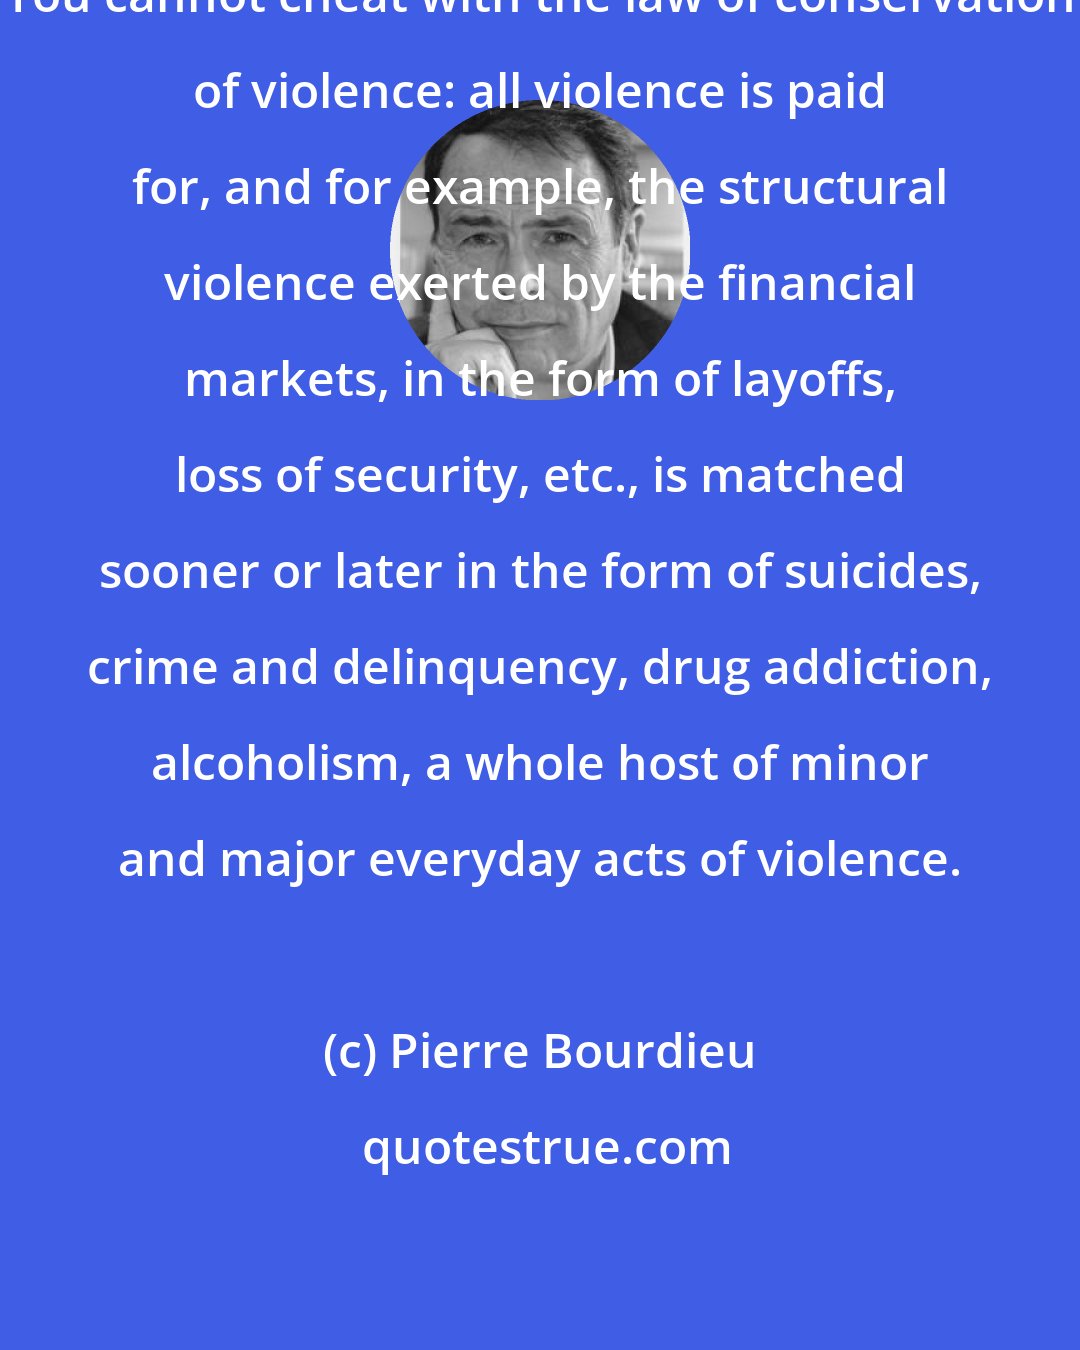 Pierre Bourdieu: You cannot cheat with the law of conservation of violence: all violence is paid for, and for example, the structural violence exerted by the financial markets, in the form of layoffs, loss of security, etc., is matched sooner or later in the form of suicides, crime and delinquency, drug addiction, alcoholism, a whole host of minor and major everyday acts of violence.